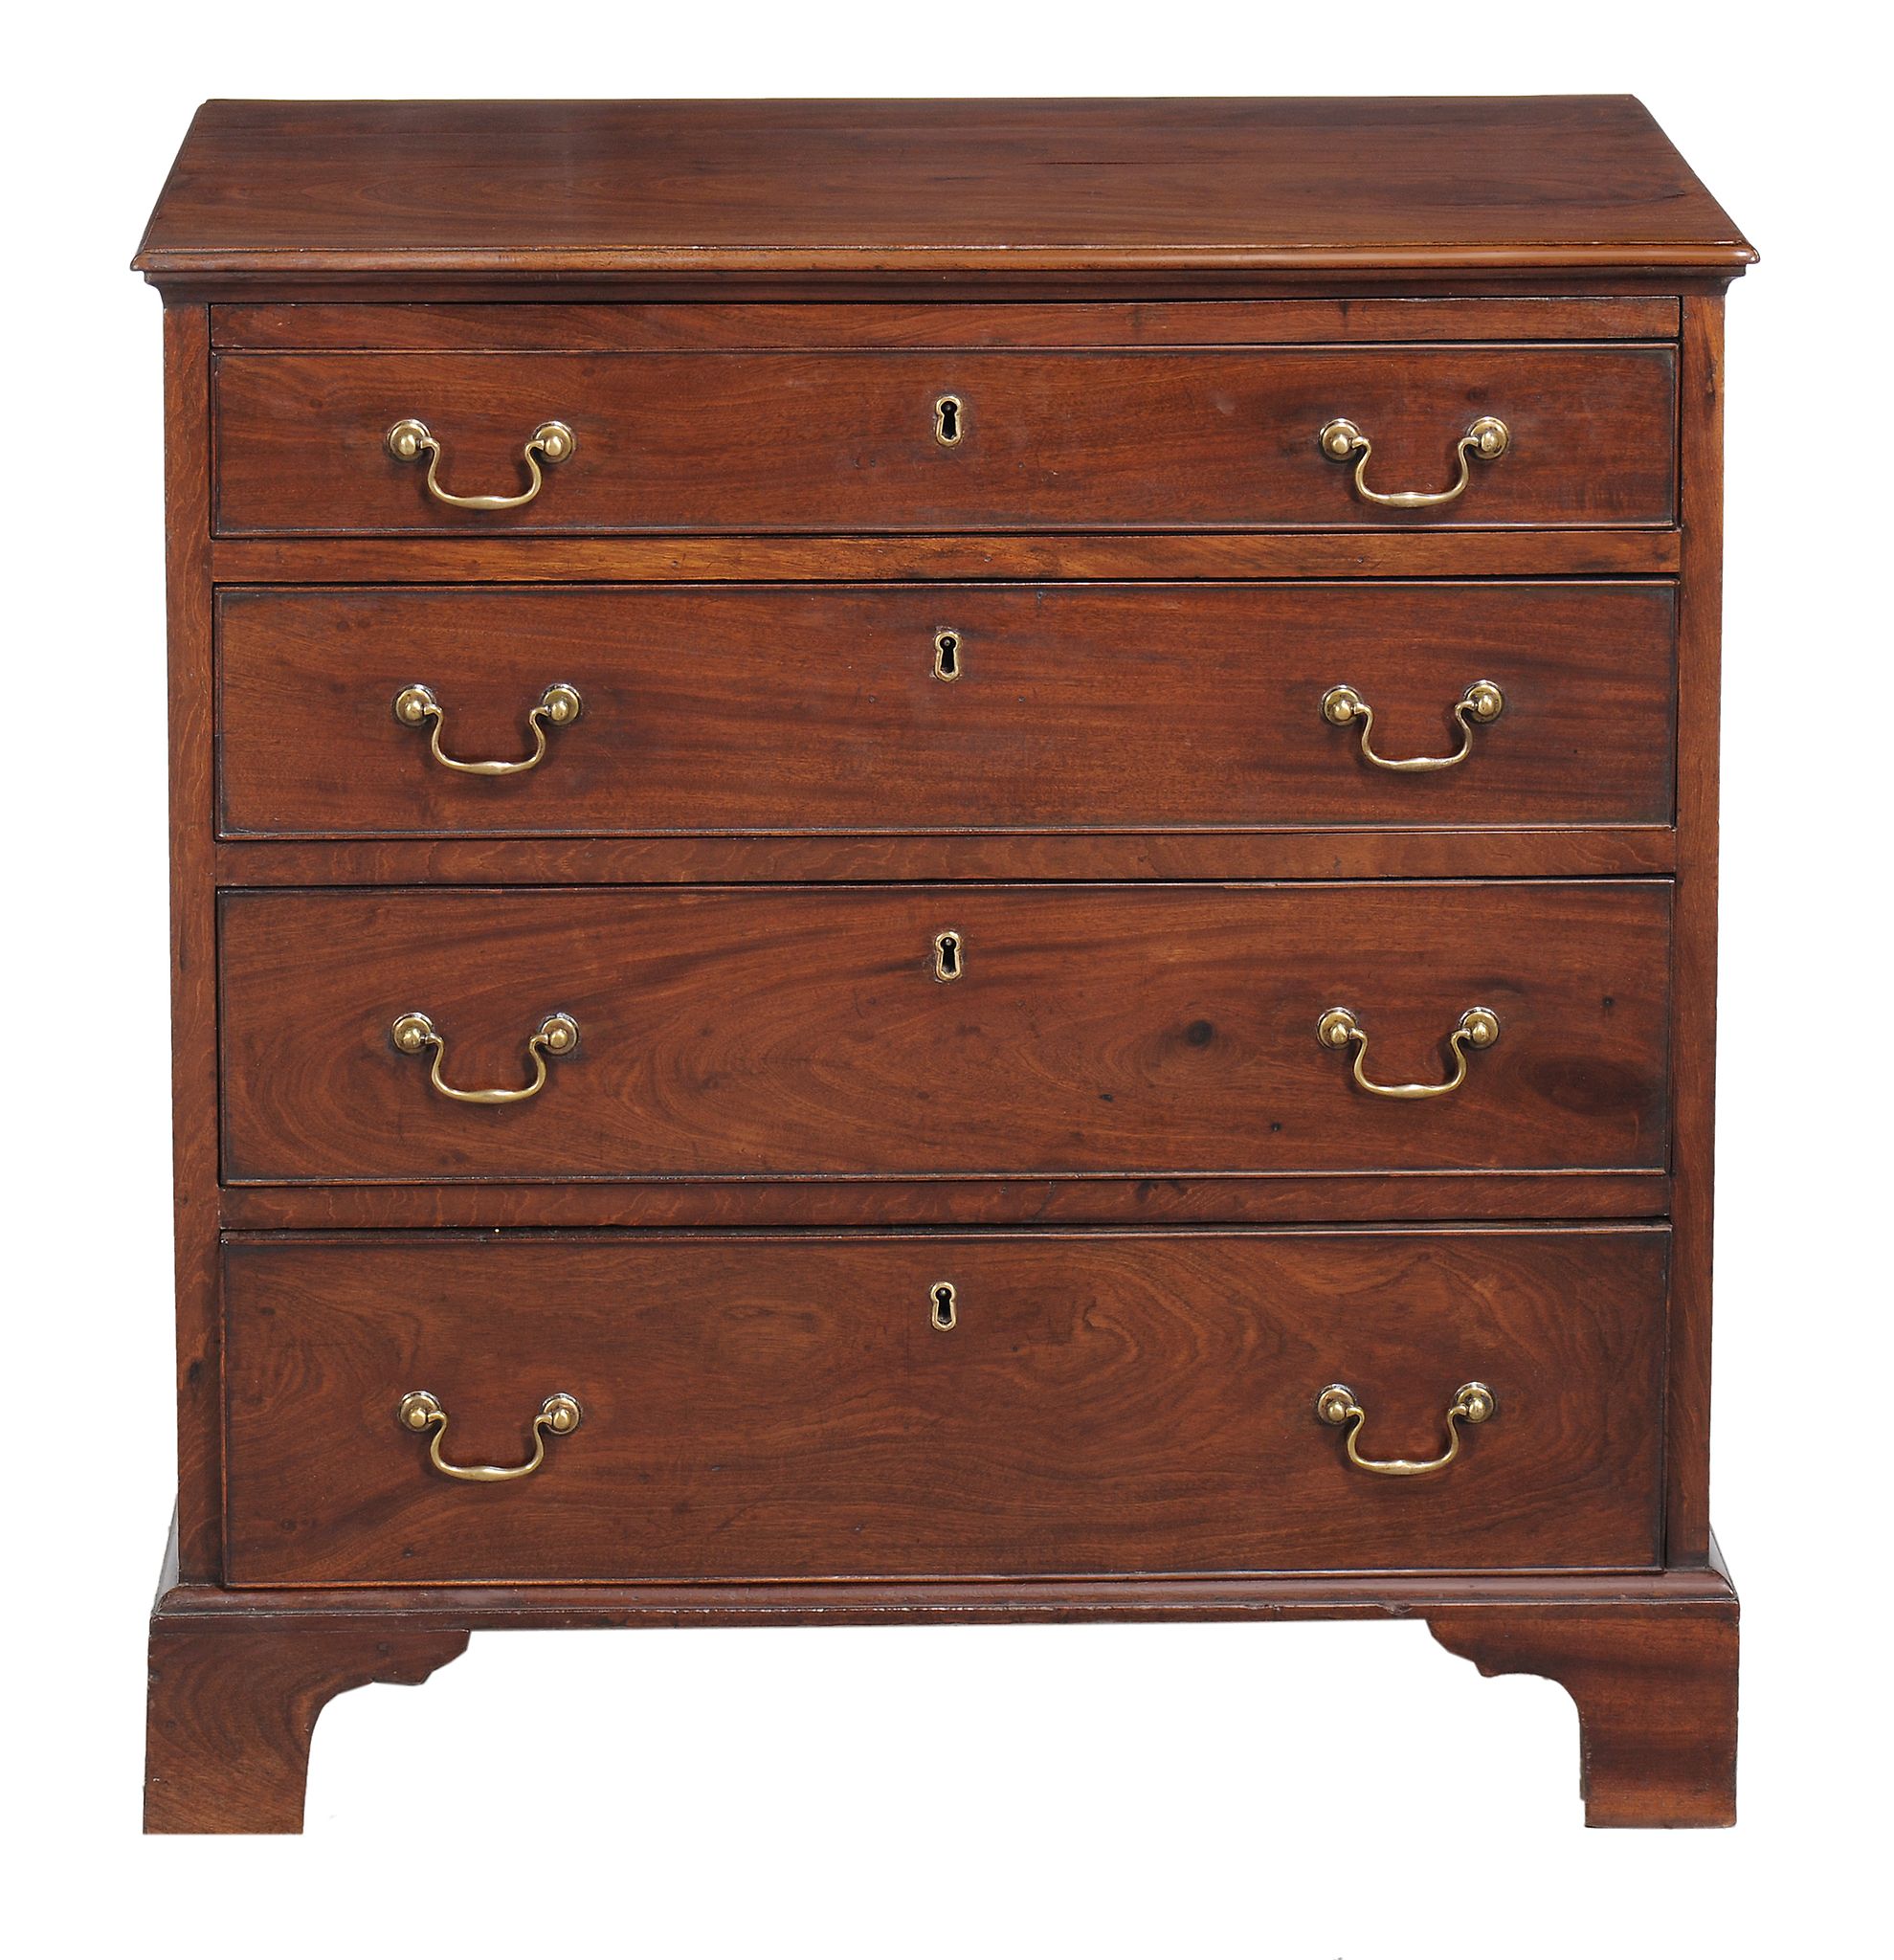 A George III mahogany chest of drawers, circa 1790, rectangular moulded top A George III mahogany